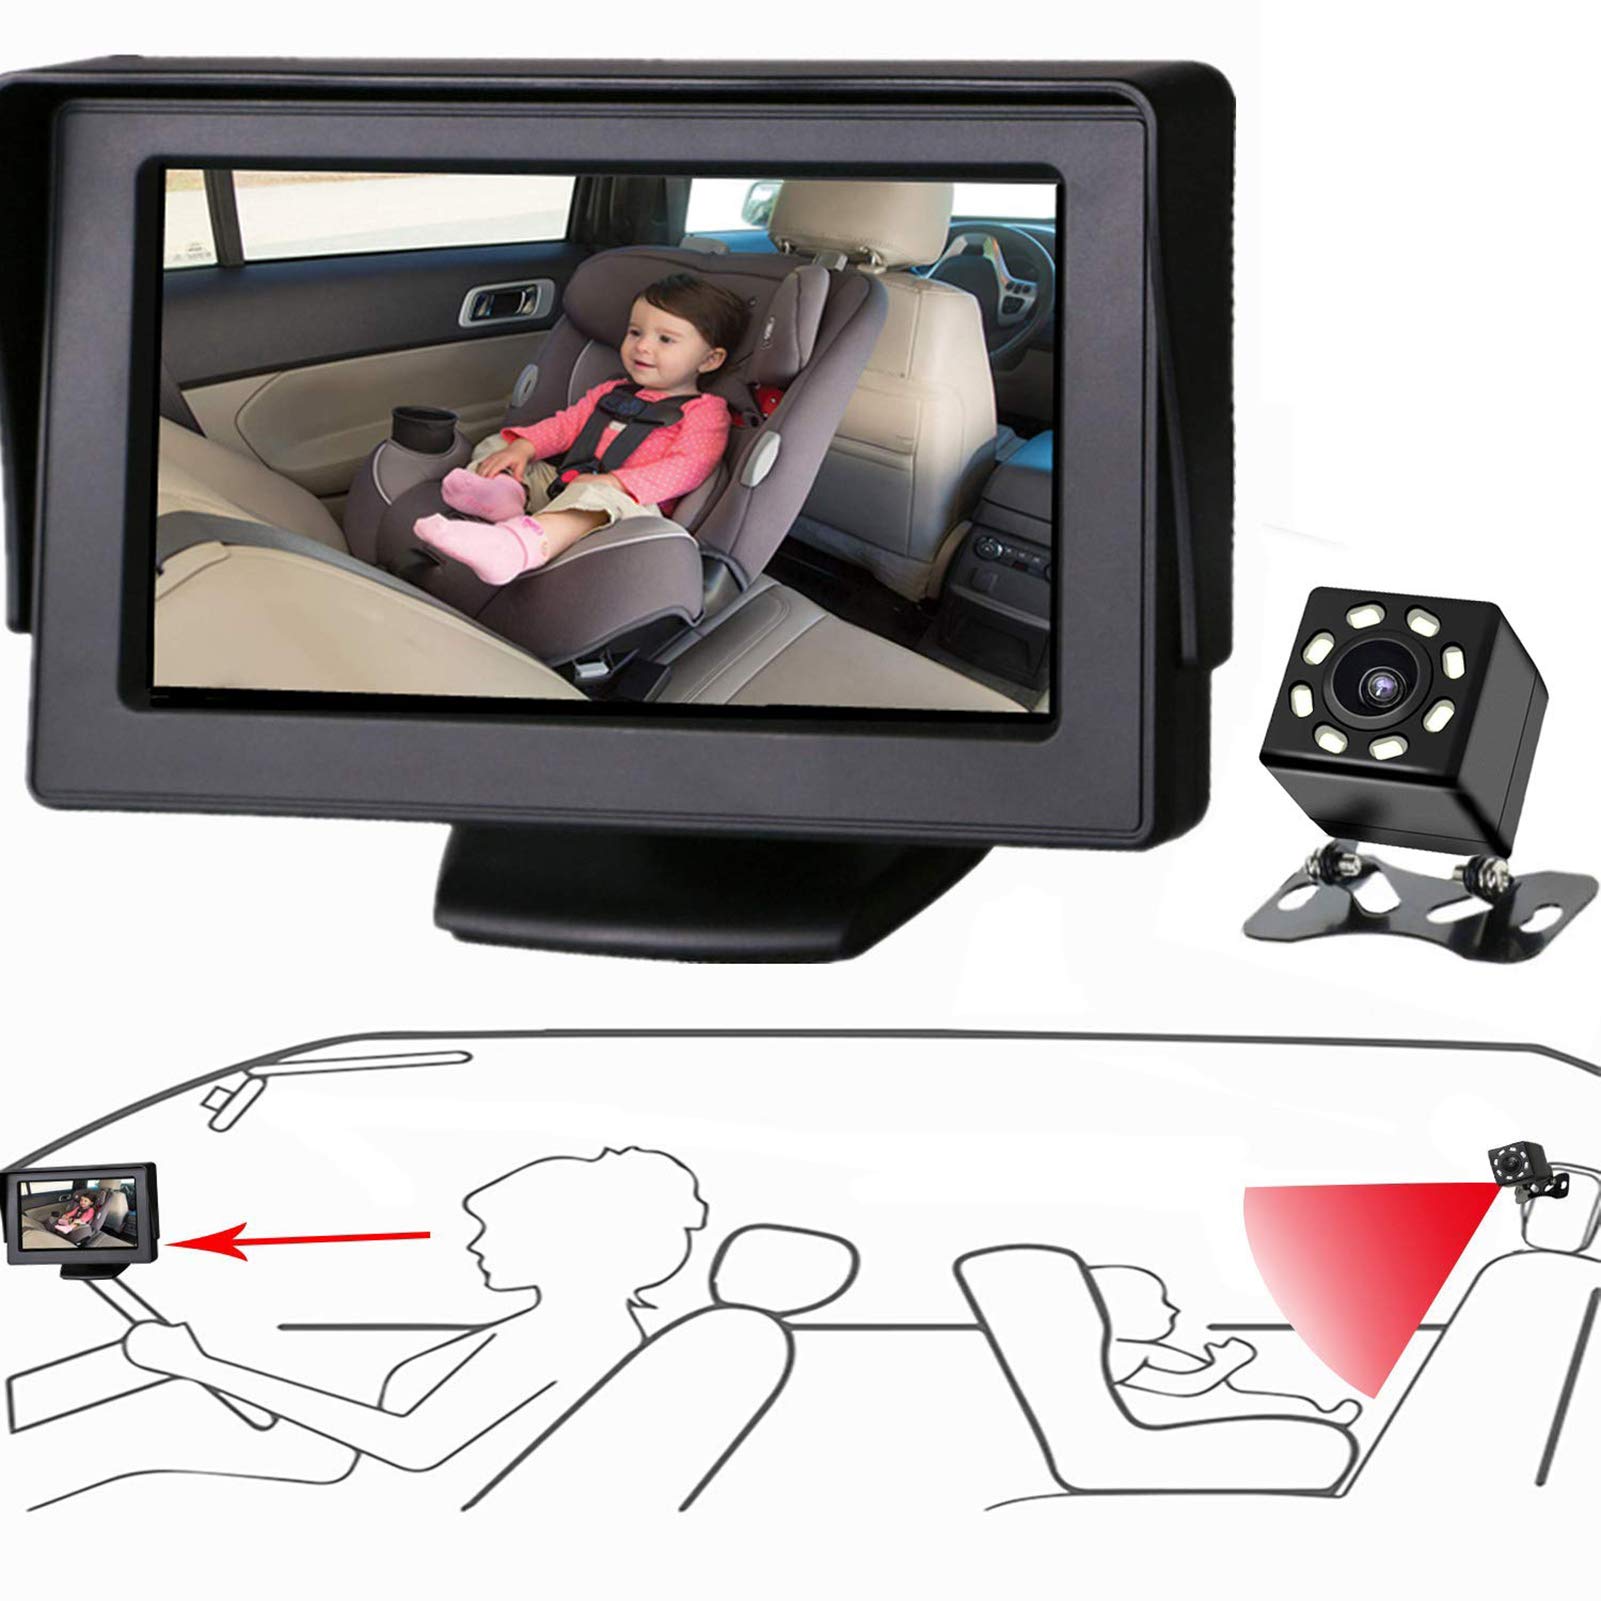 Itomoro Baby car Mirror, View Infant in Rear Facing Seat with Wide crystal clear View,camera Aimed at Baby-Easily to Observe The